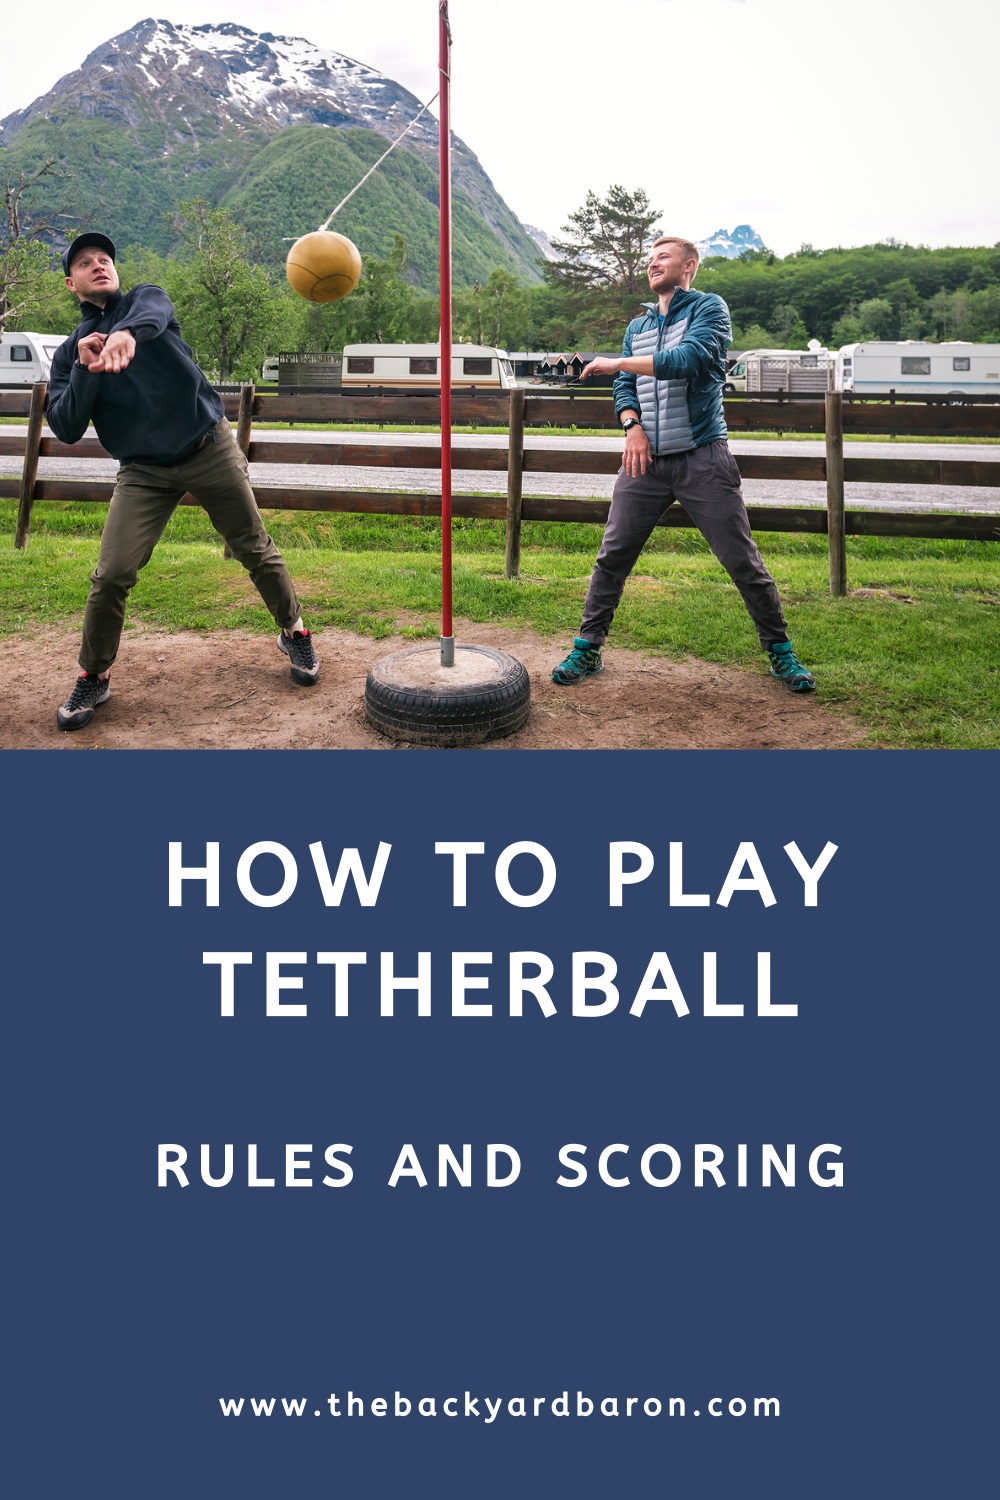 How to play tetherball (rules and scoring)